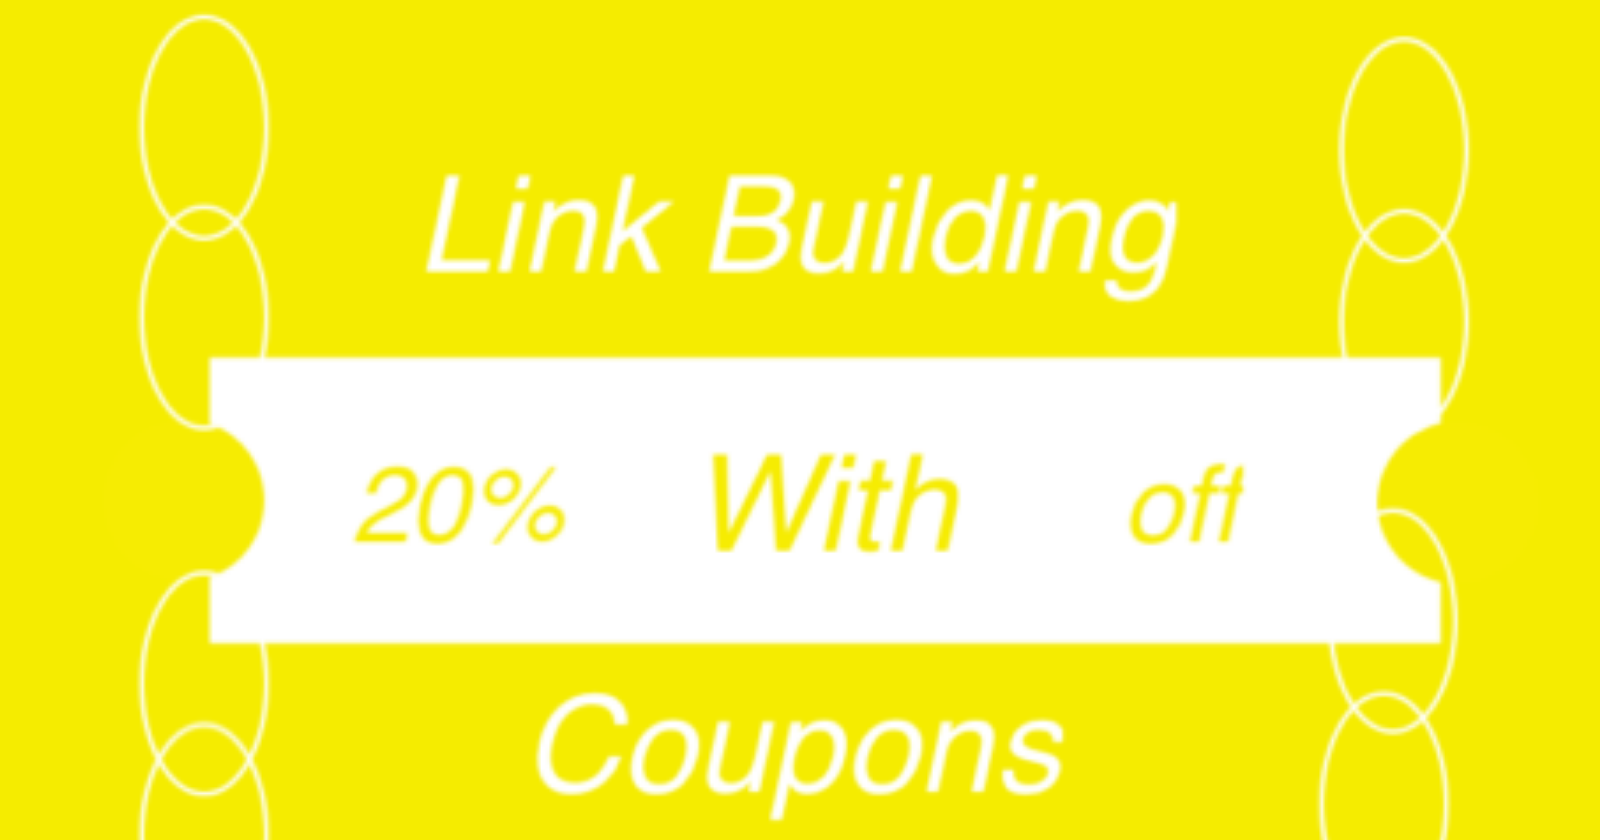 coupons-for-link-building-610bdac6a31a7-sej.png